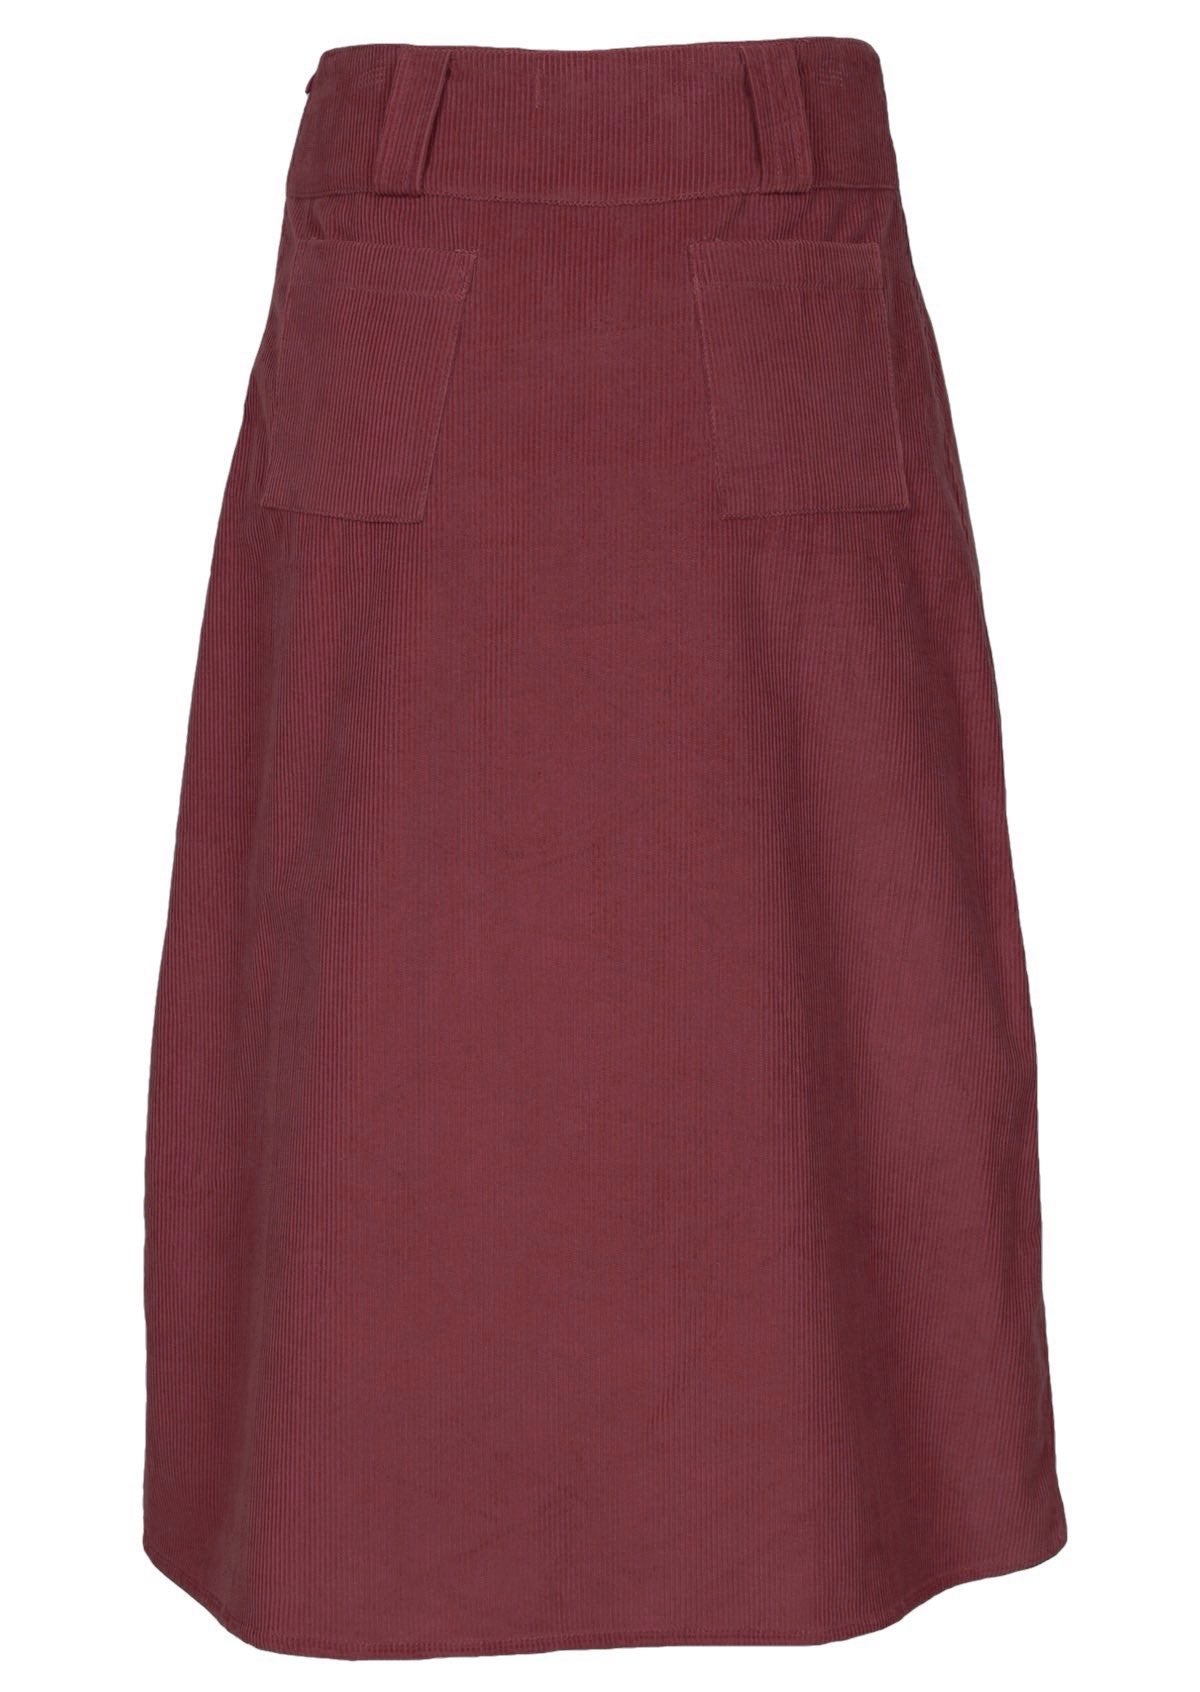 Deep red skirt features back pockets. 